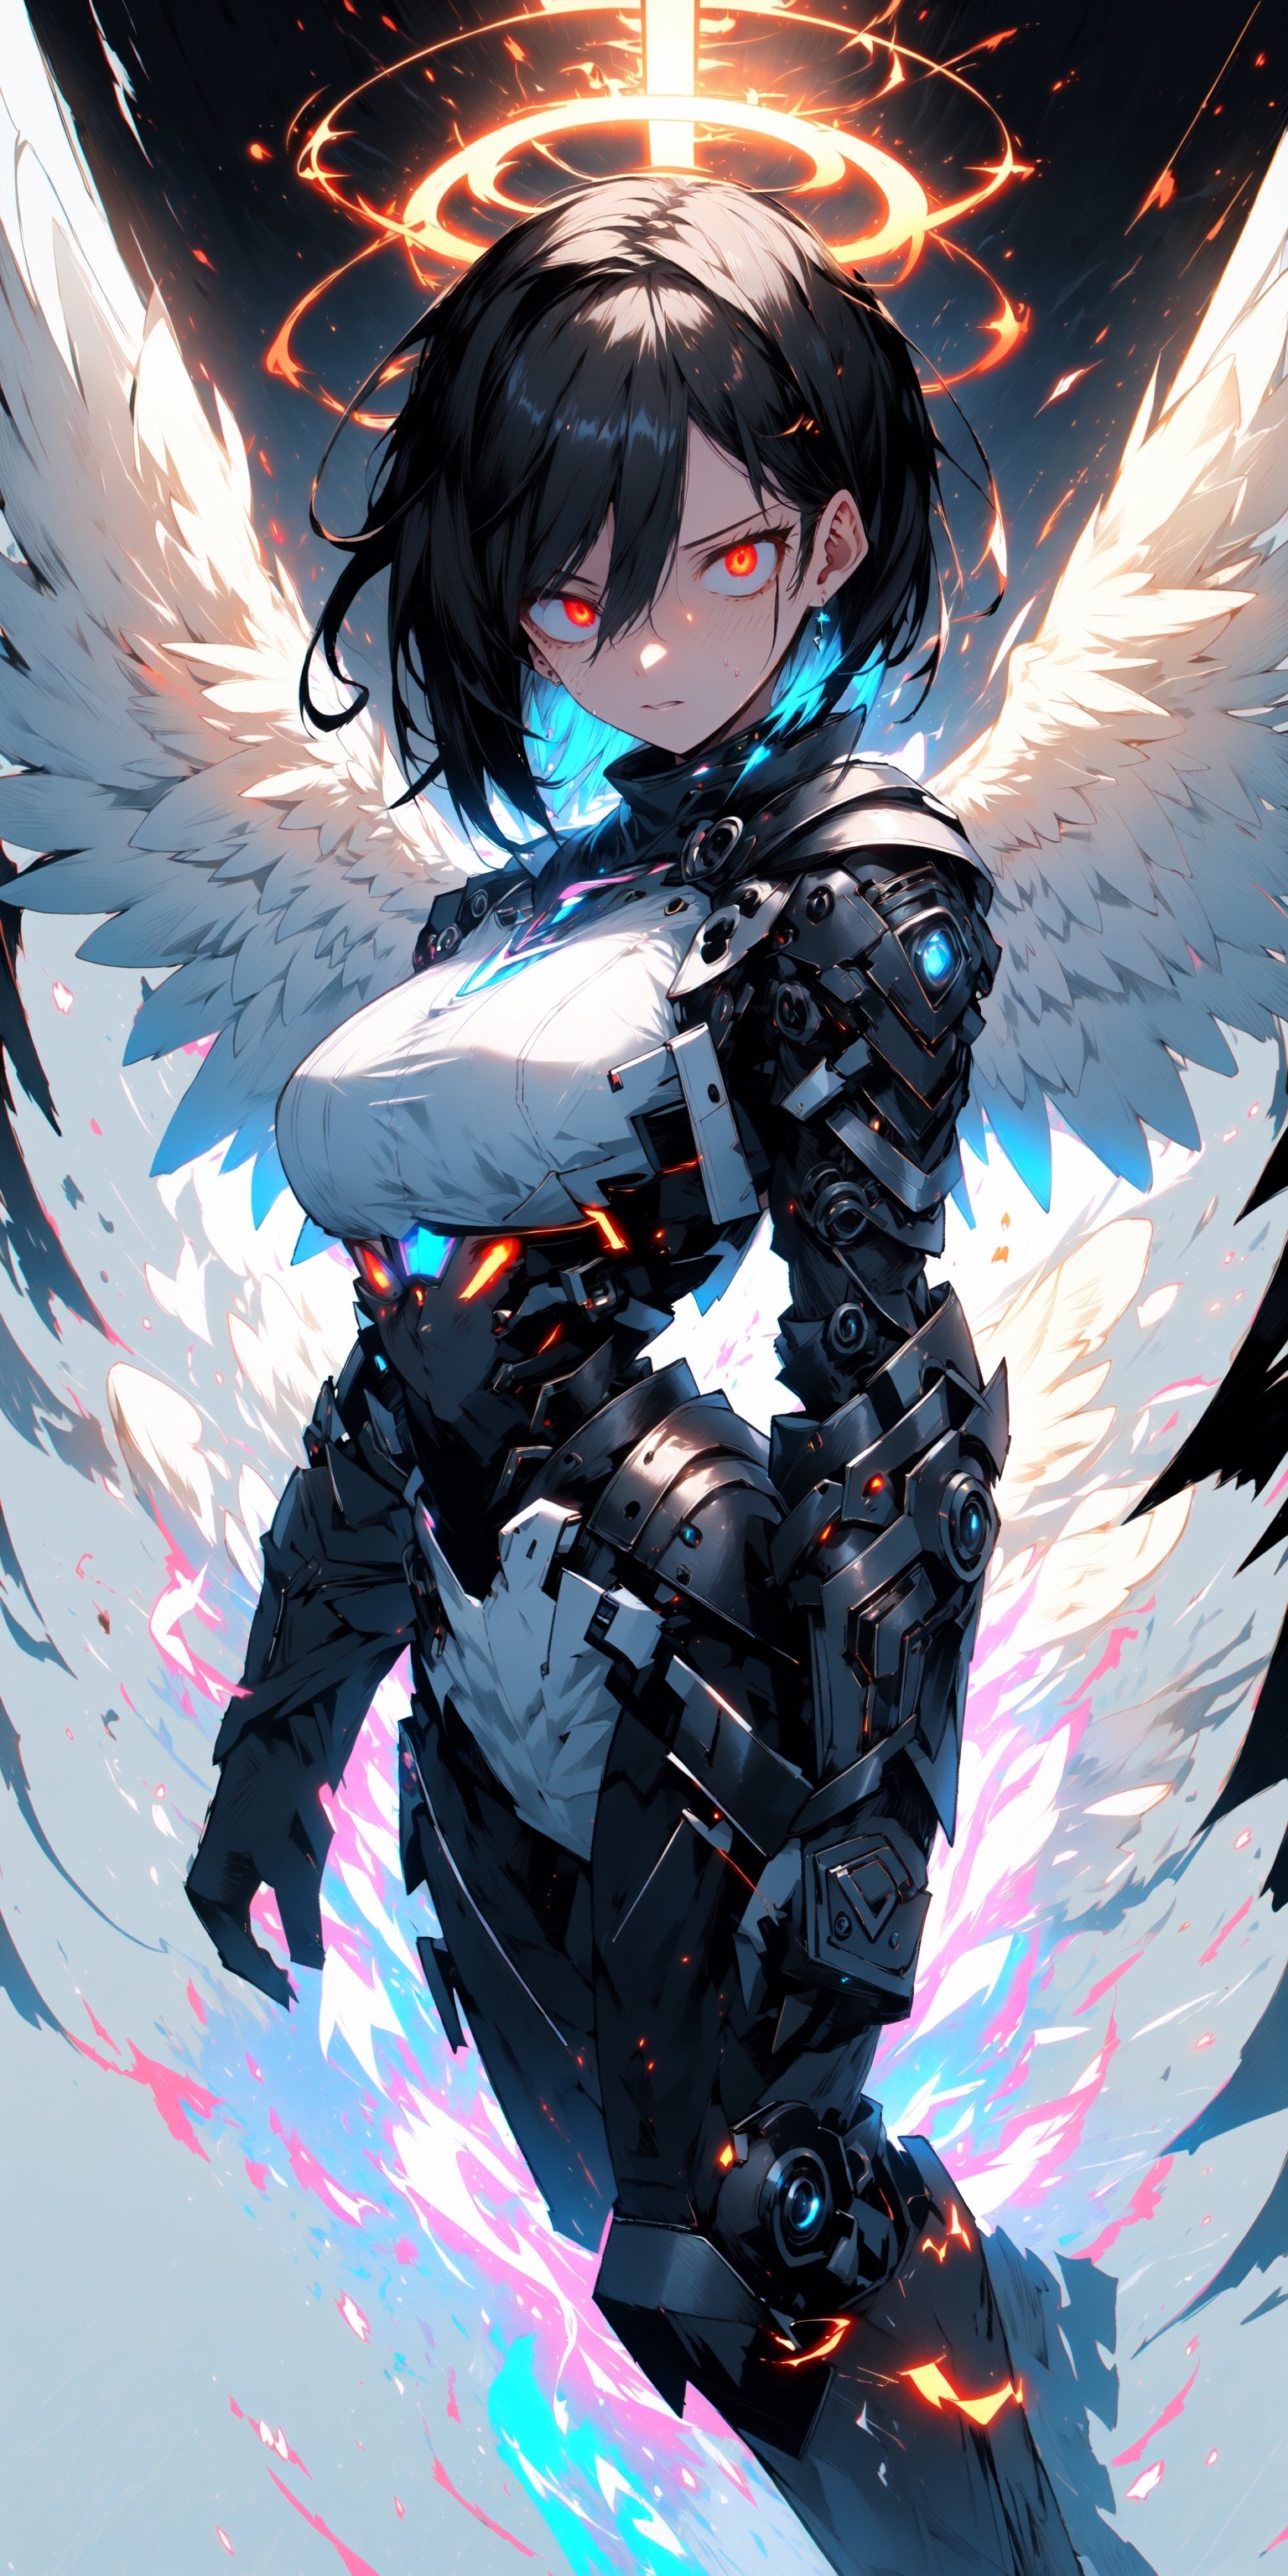 (1girls:1.4), (holy_background:1.4), (simple_background:1.4),

dynamic_angle, tyndall effect, volumetric lighting, looking_at_viewer, full_body, bright_theme, niji, clear_lines

short-hair, black-hair, Pale_skin, big_breasts, sharp_face, multicolored_eye, angelic angel, eyeshadow, eyeliner, Eyelash, from_side, expressive eyes, perfect glowing_eyes, cyberpunk, bright angelic mecha armor, determined_face, damaged, glowing, aura, energy, beam, white plugsuits, bright exoskeleton suit, tall, halo, holyness, machine wings

(best quality:1.4), (highres:1.4), (high_resolution:1.4), (masterpiece:1.4), sidelighting, super detail, hyper detail, intricate_details, ligne_claire, perpect face,midjourney